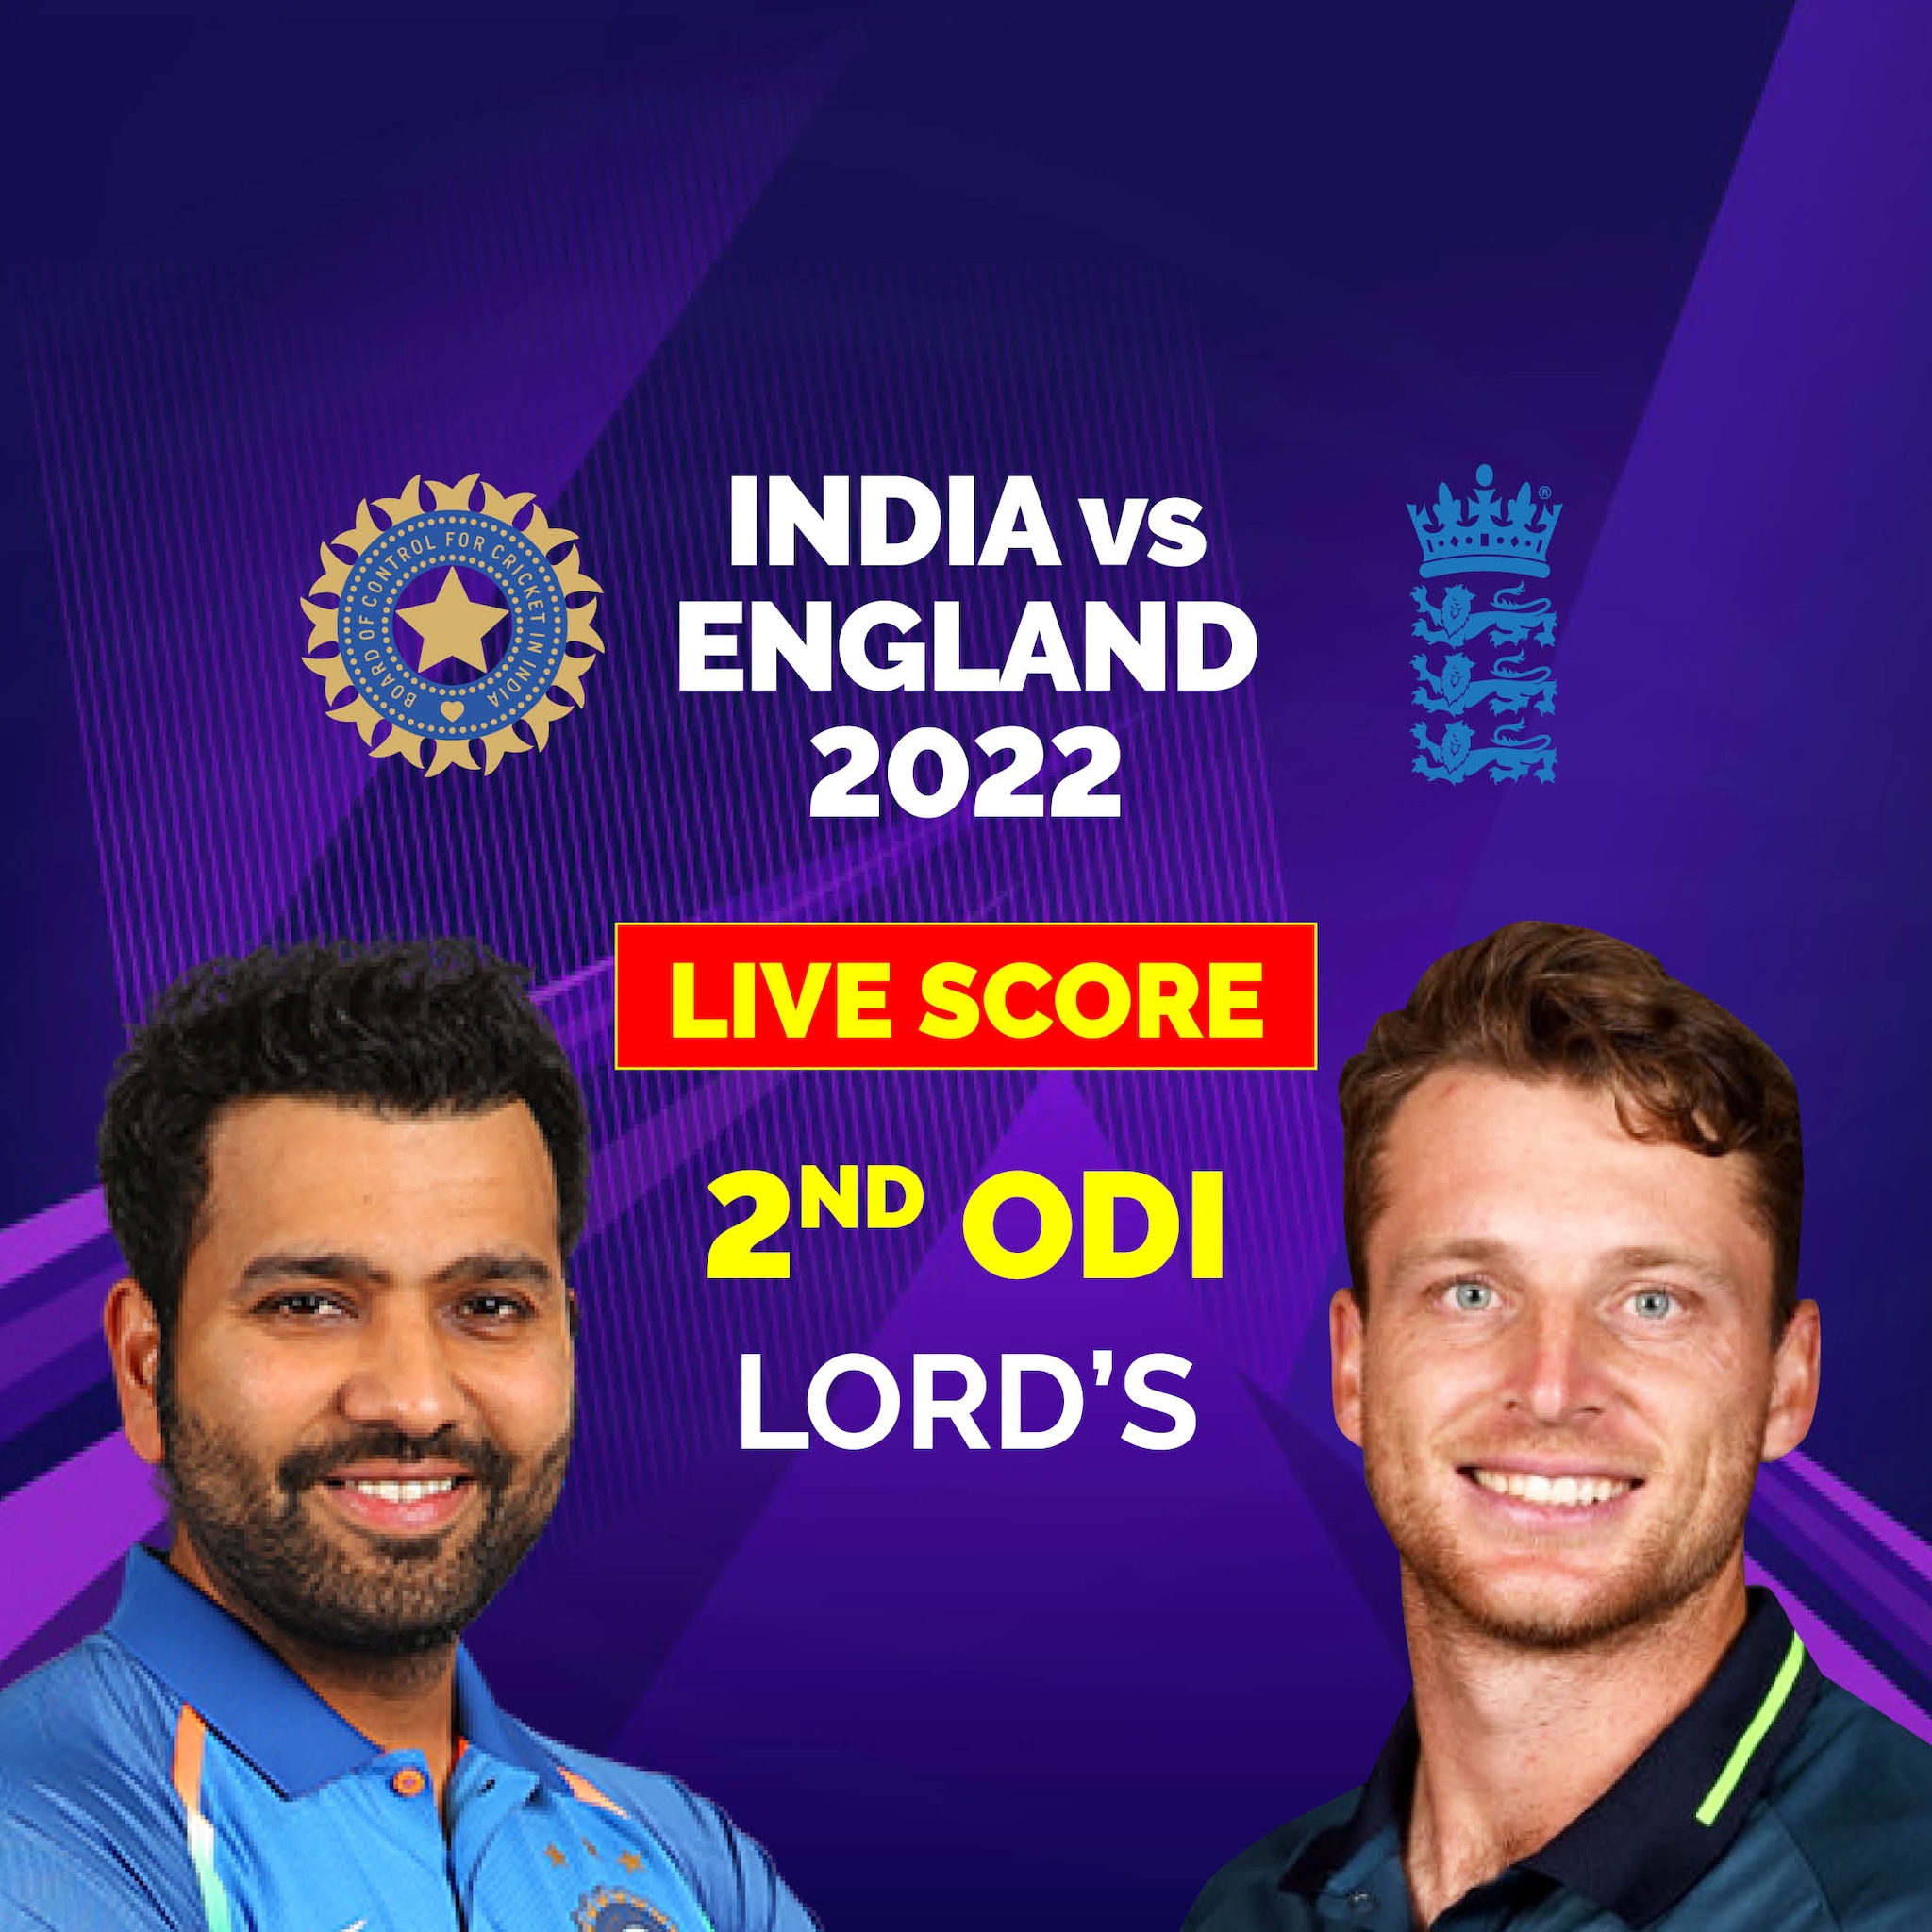 IND versus ENG second ODI Live Score Updates: England loses Livingstone at Lord's